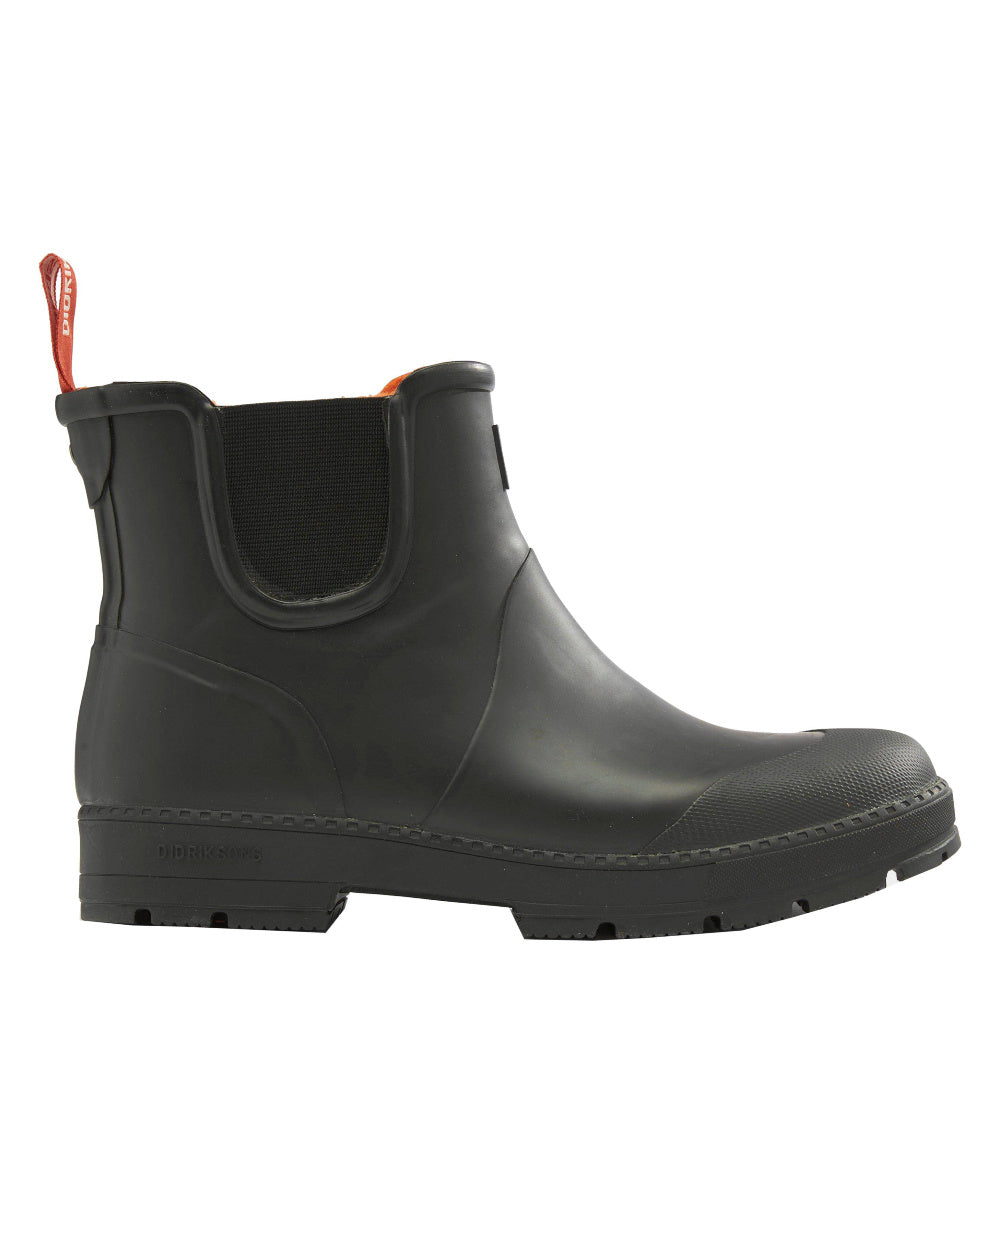 Black Coloured Didriksons Mens Vinga Boots 2 On A White Background 